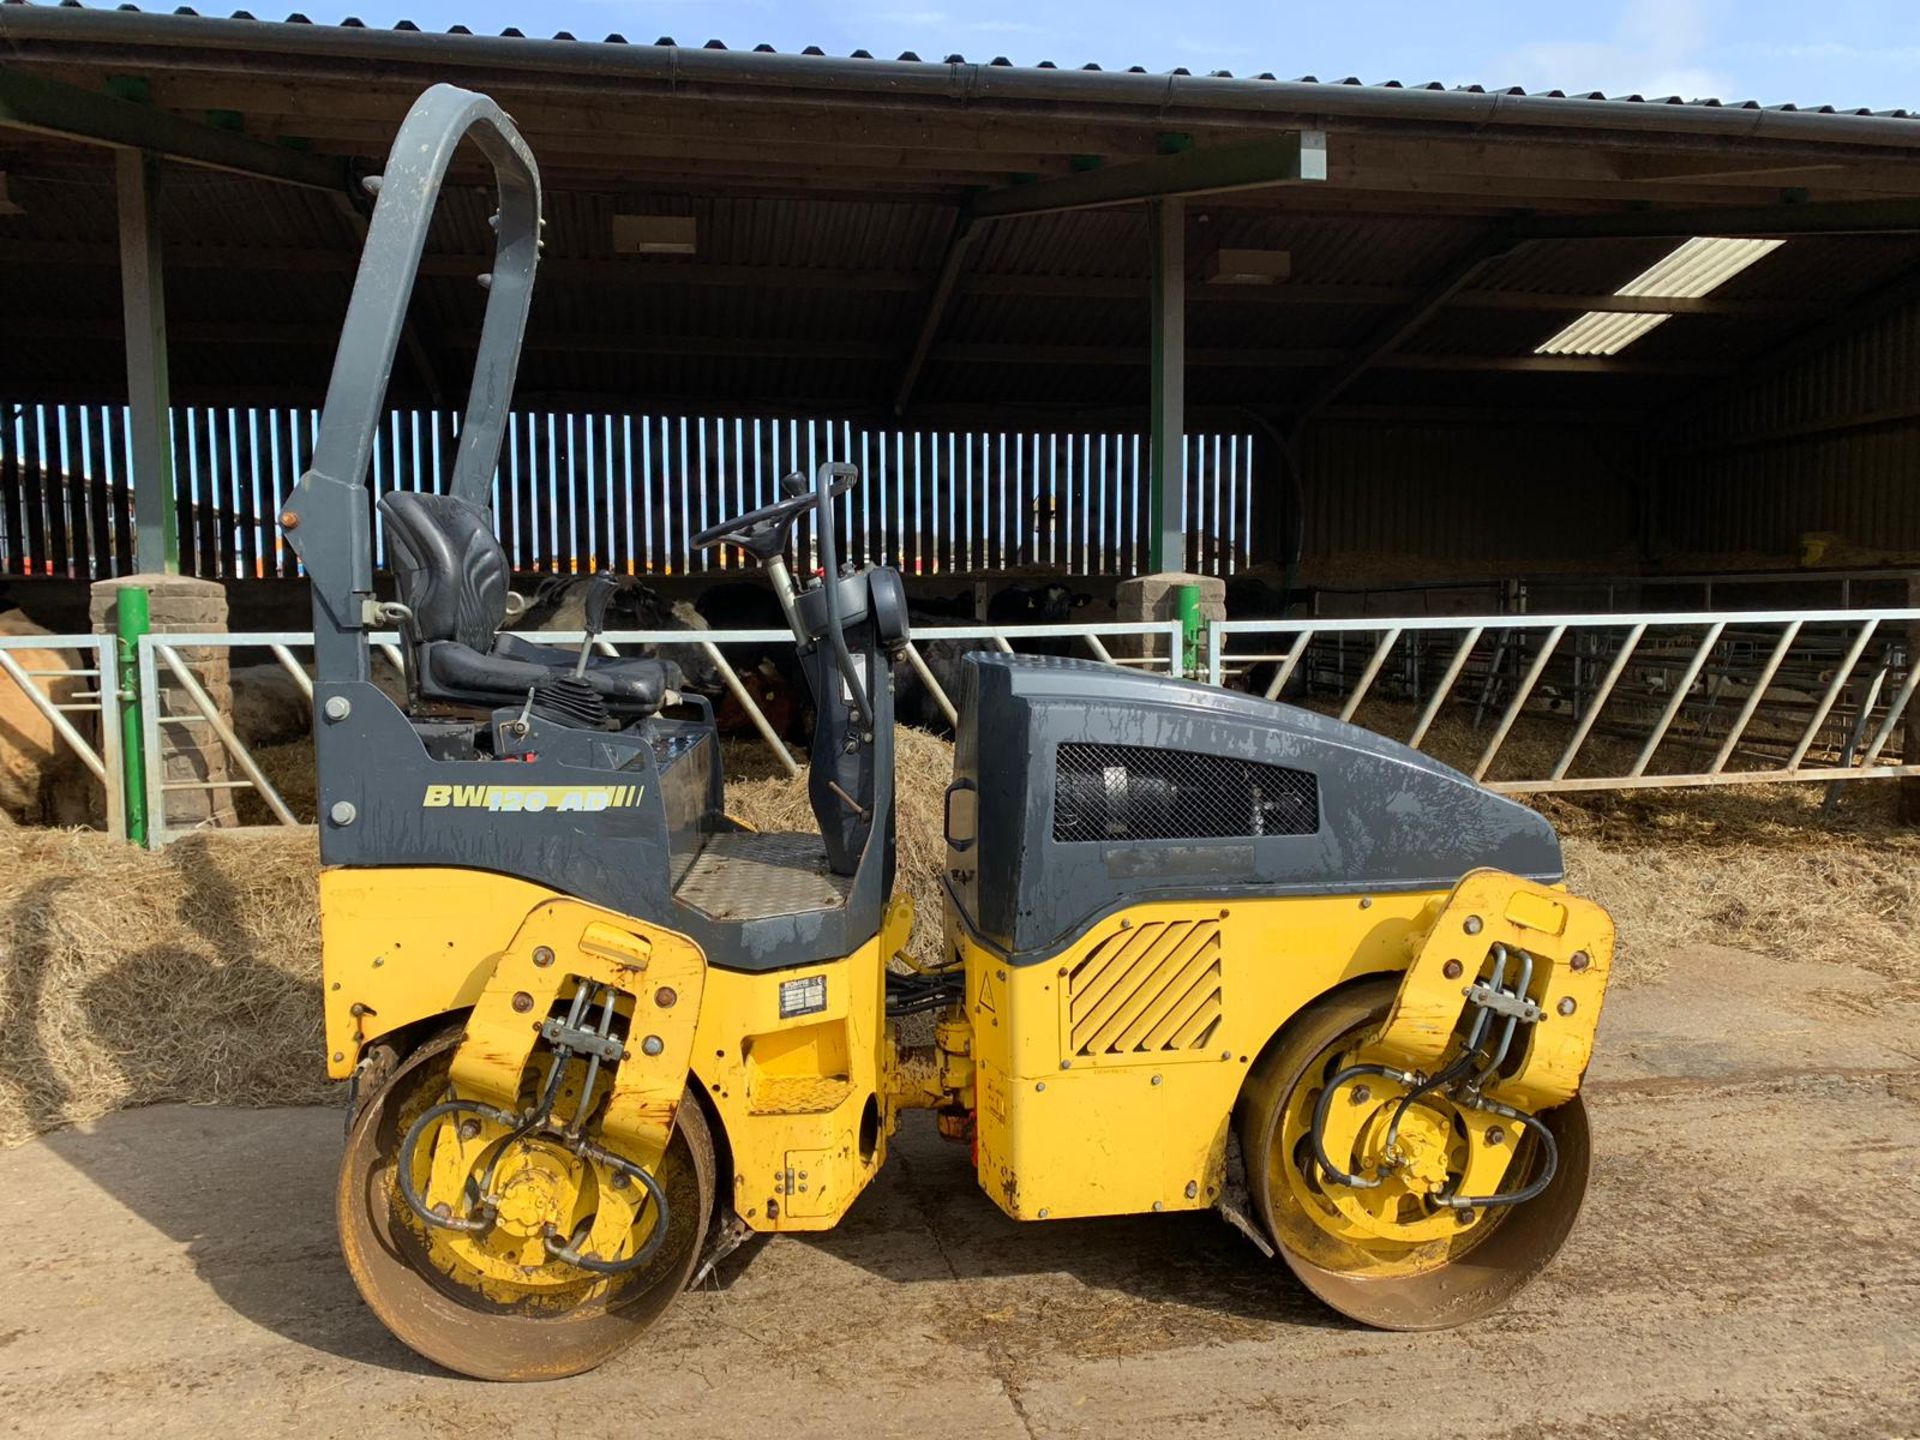 2008 BOMAG BW 120 TWIN DRUM RIDE ON VIBRATING ROLLER *PLUS VAT*